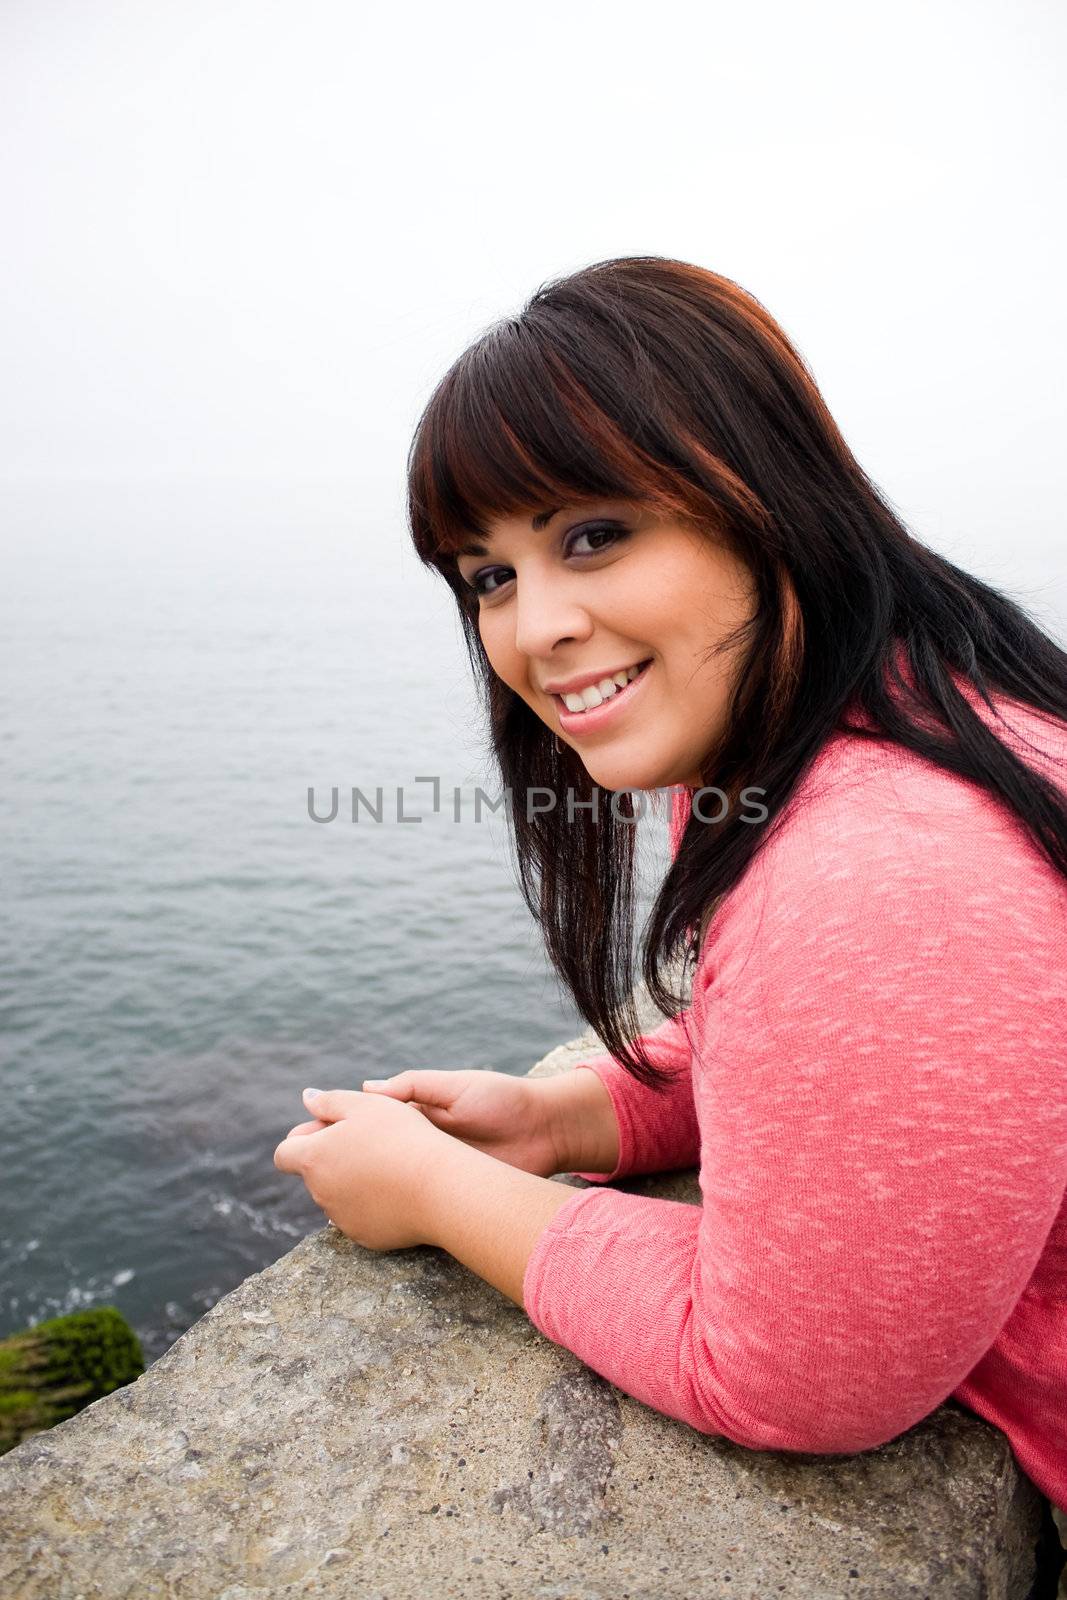 A young hispanic woman with red highlights in her hair by the sea shore in Newport Rhode Island.